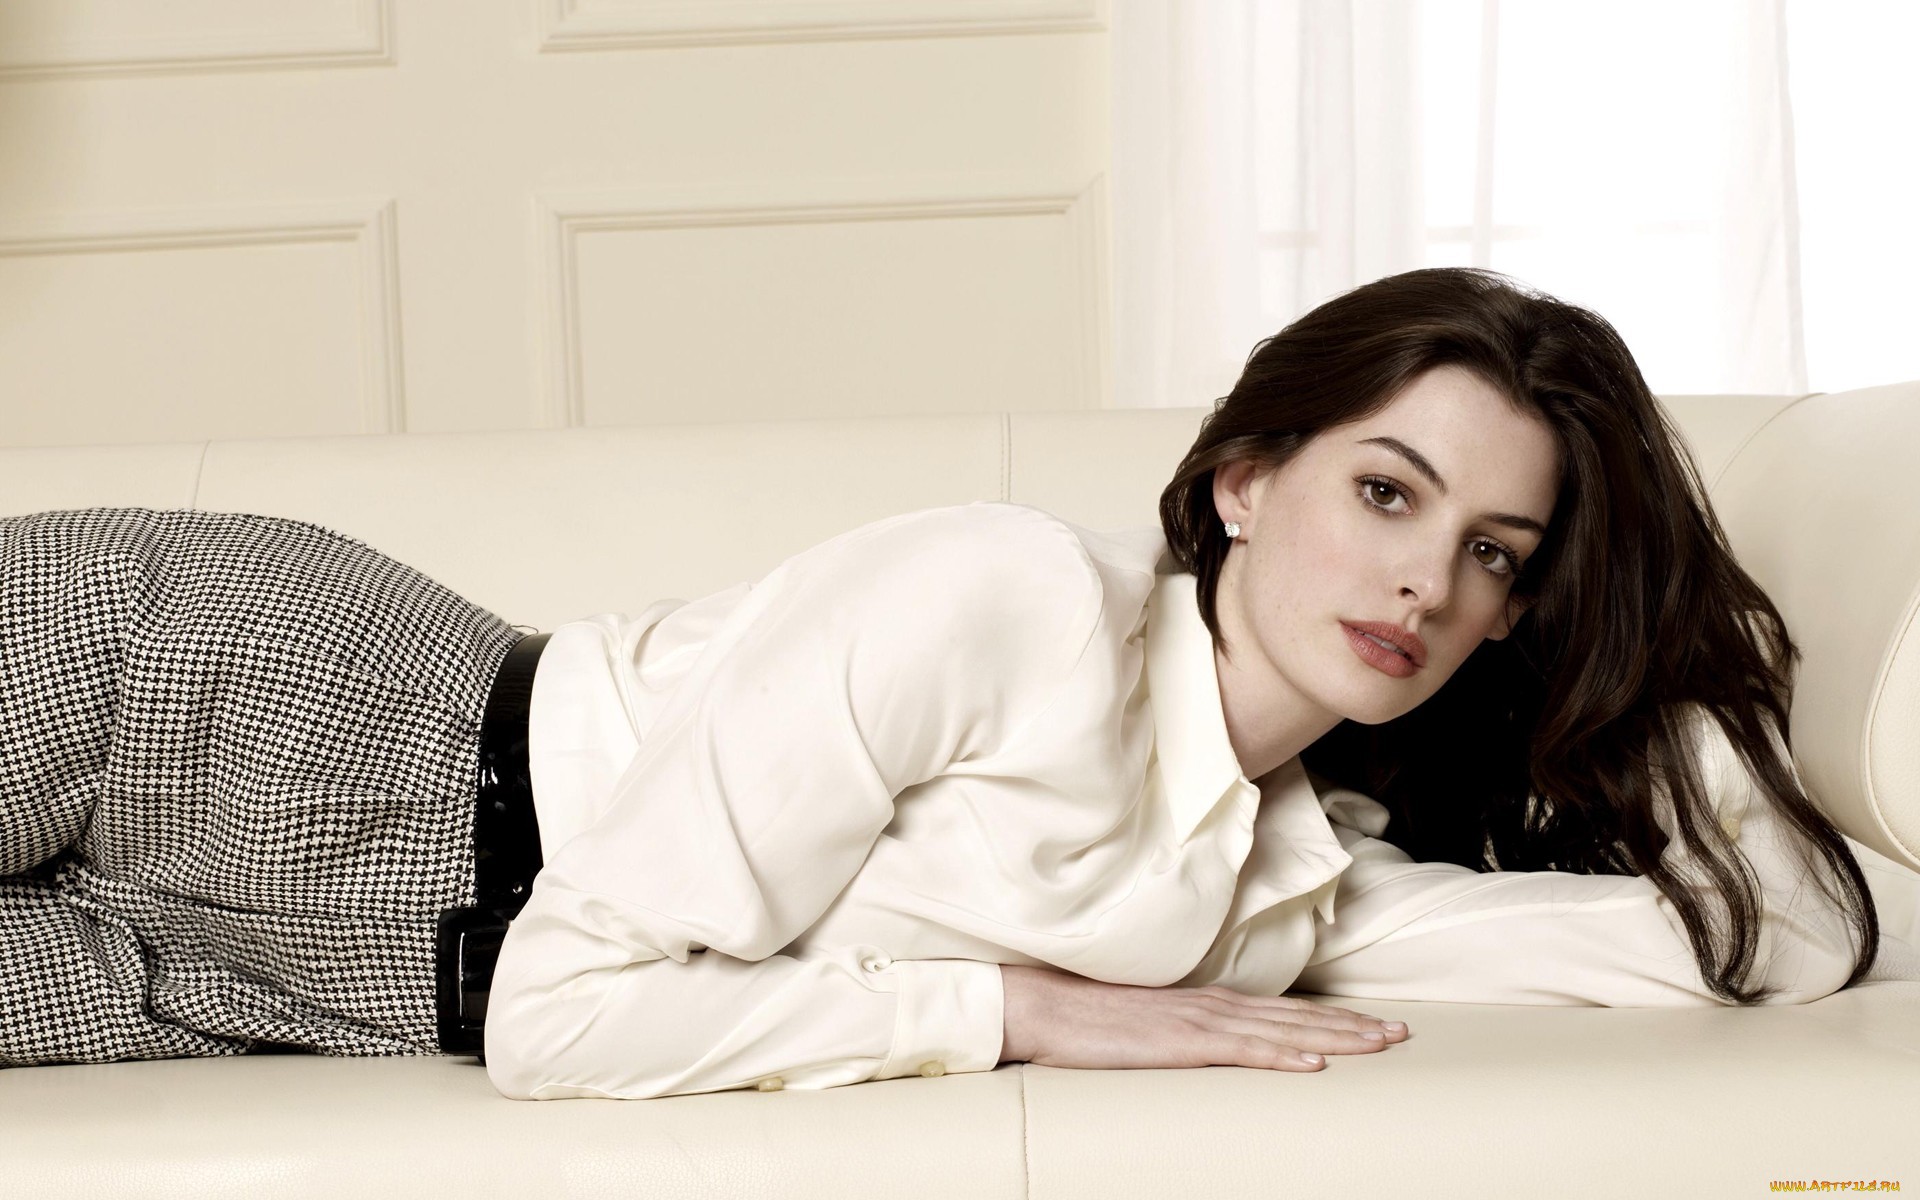 anne hathaway wallpapers high resolution